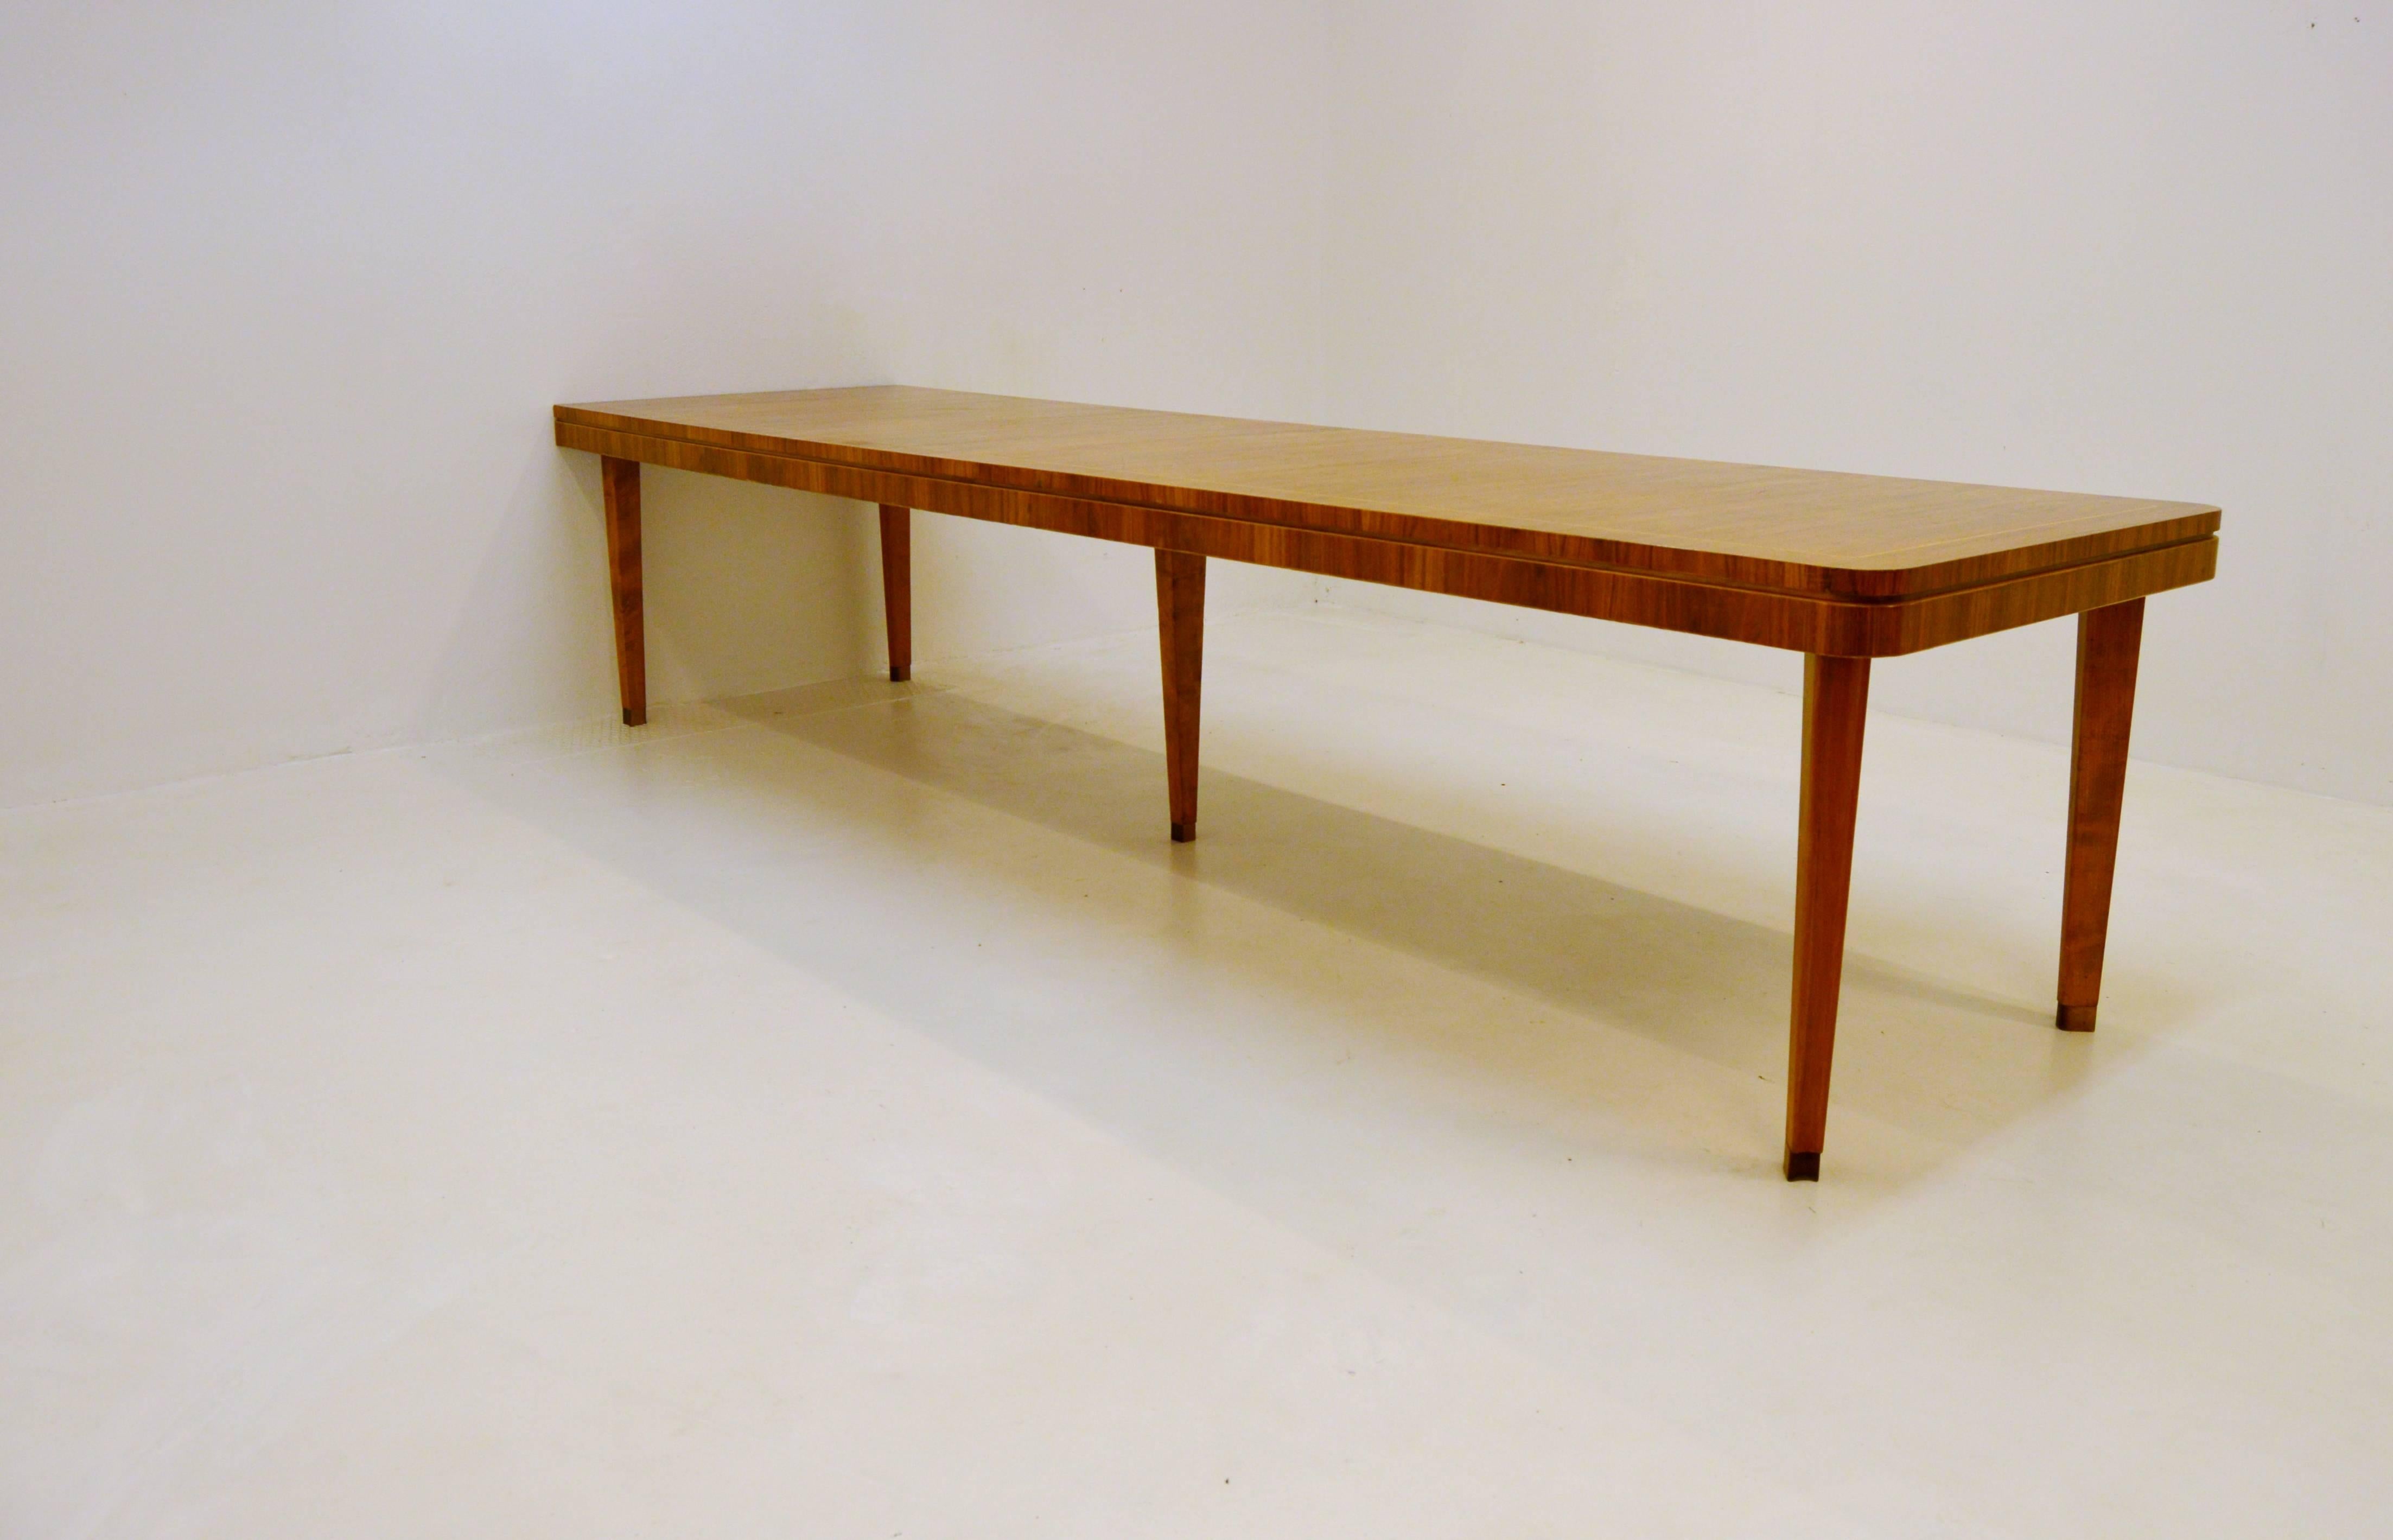 Large dining or conference table of walnut, birch and mixed woods.

Most likely designed by Axel Larsson for Bodafors.

According to previous owner this table was ordered by a large company in Vetlanda, near Bodafors, for their board meeting